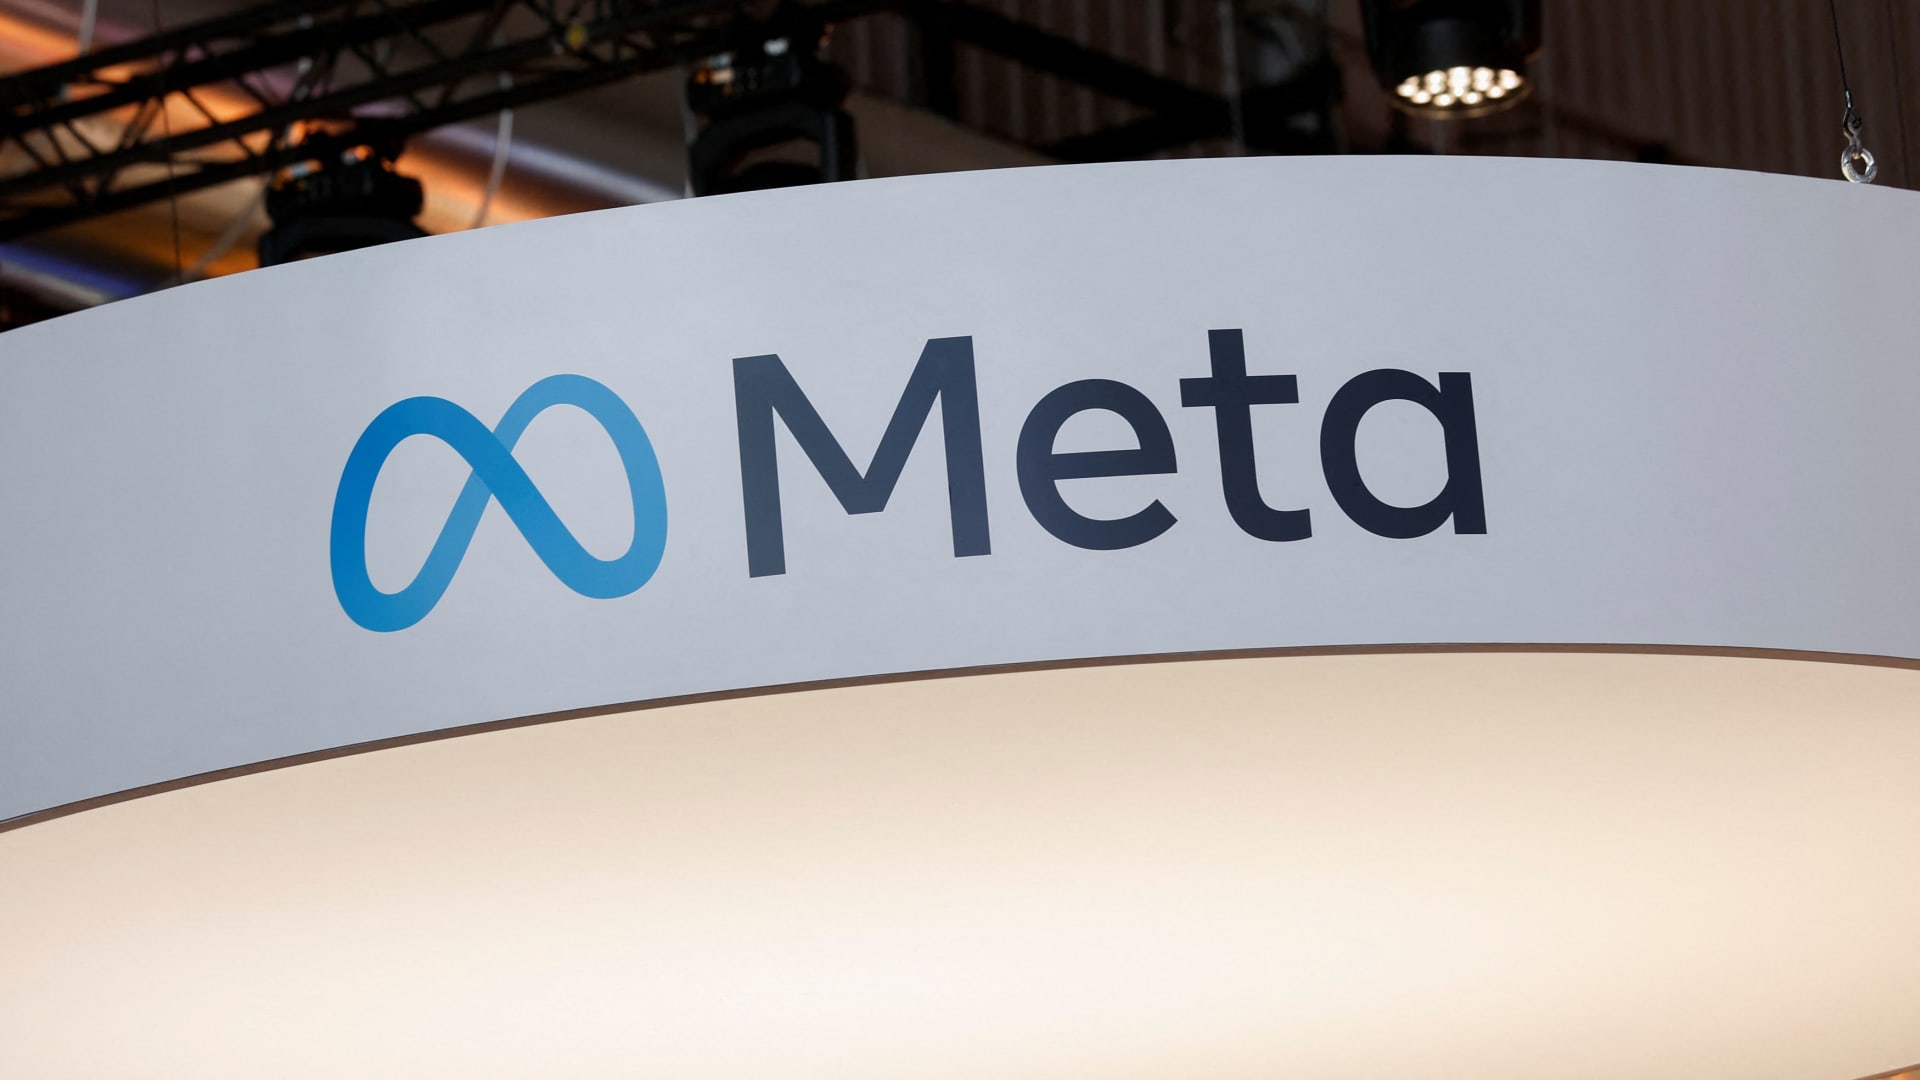 Metaplatforms, ServiceNow, Align Technology and more